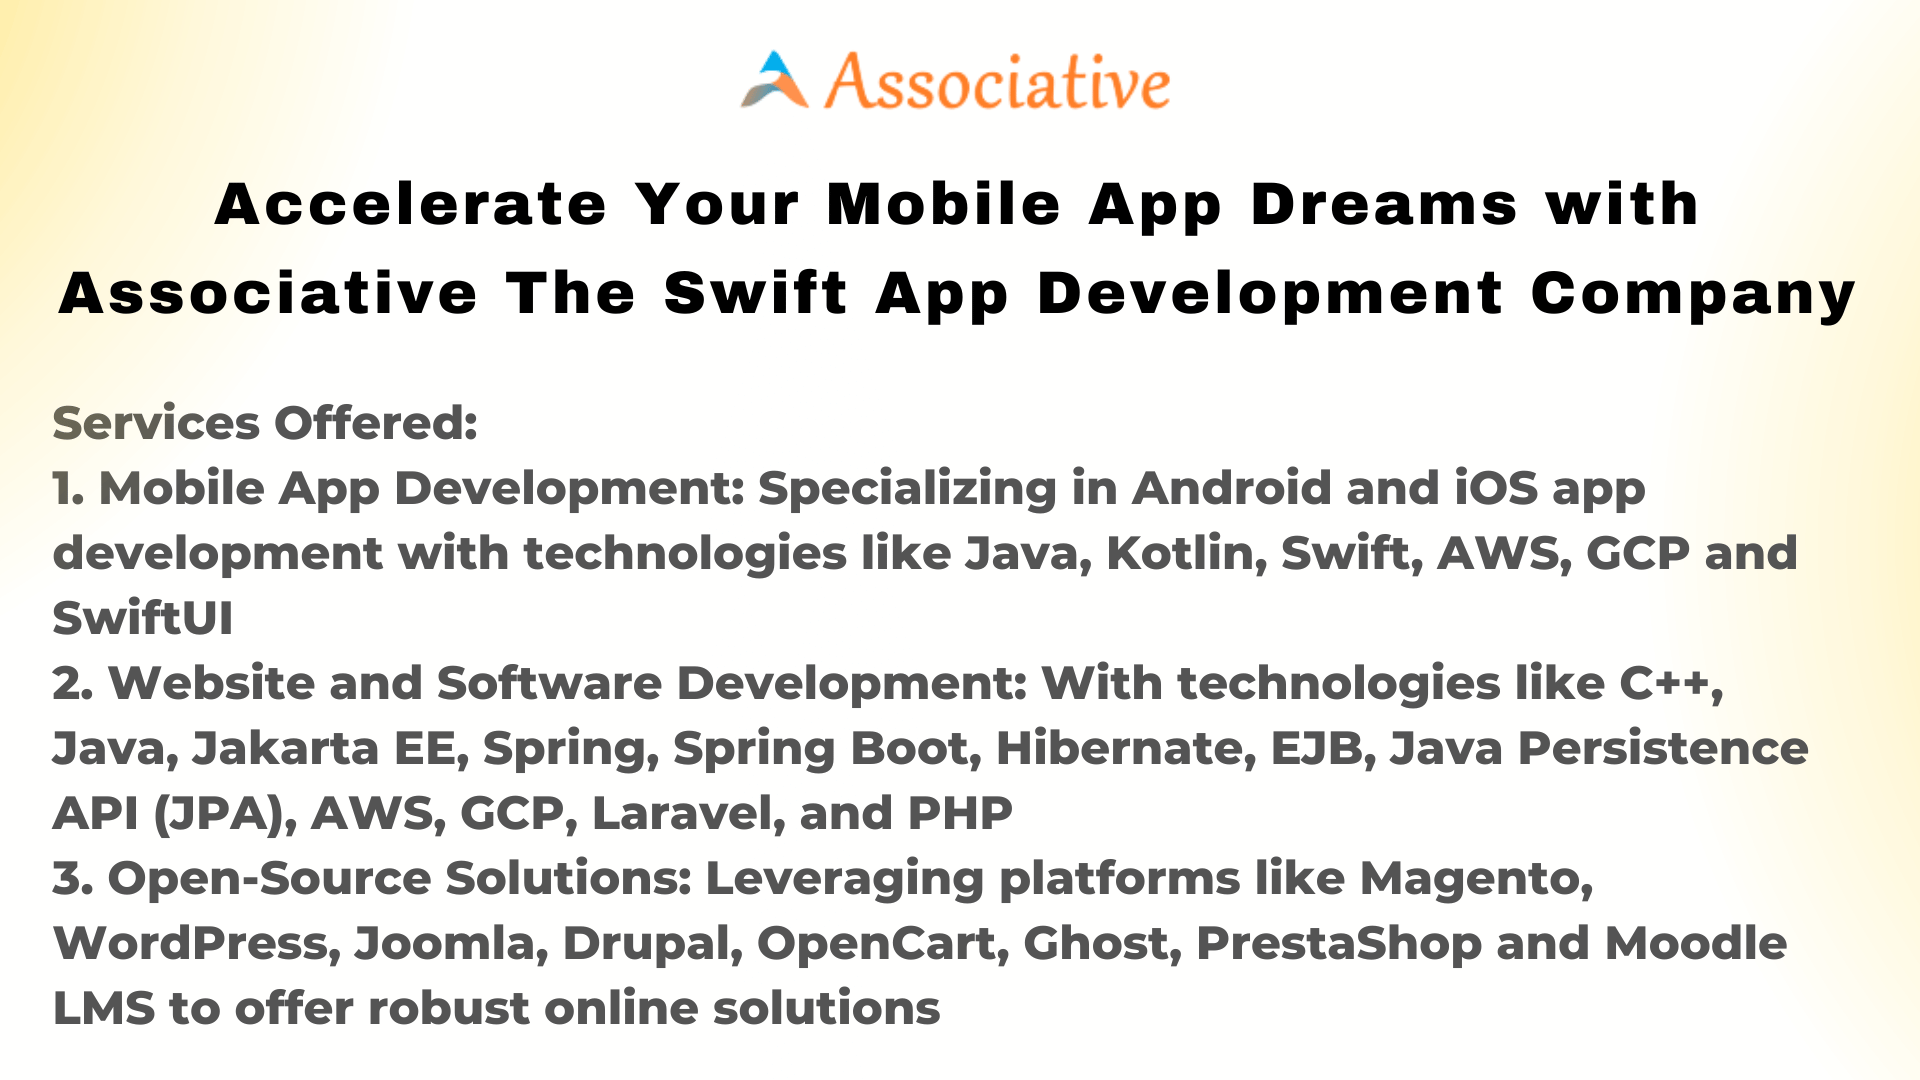 Accelerate Your Mobile App Dreams with Associative The Swift App Development Company